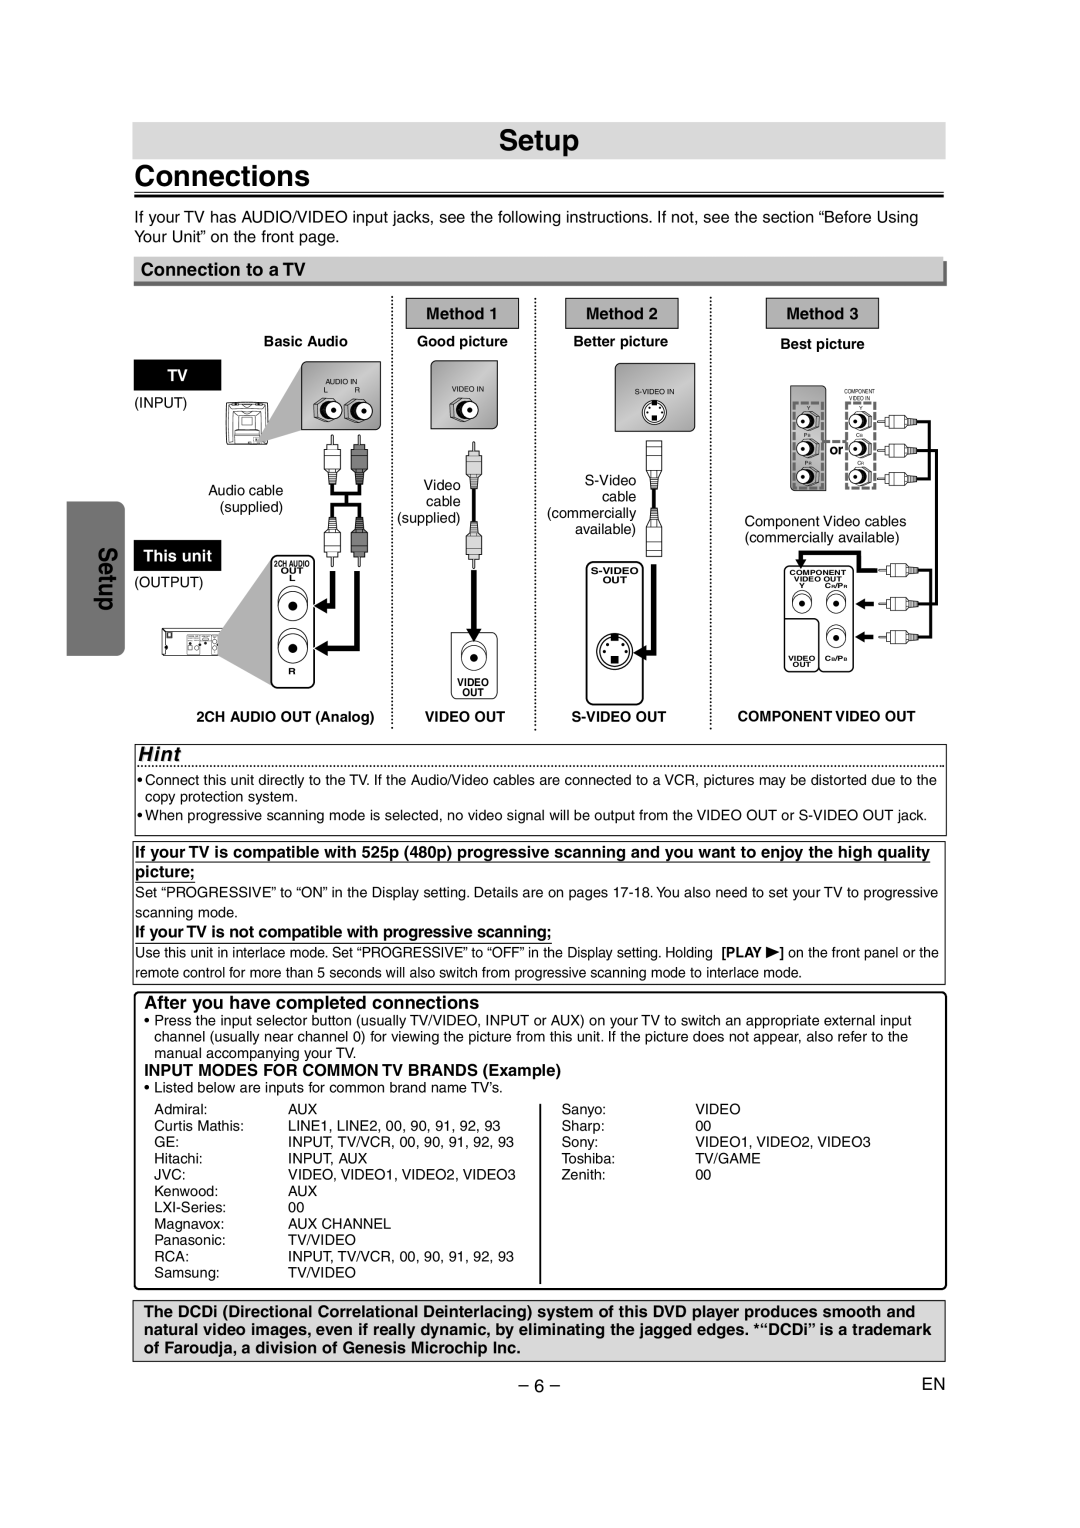 FUNAI MSD1005 owner manual Setup Connections, Connection to a TV, After you have completed connections, Method, This unit 